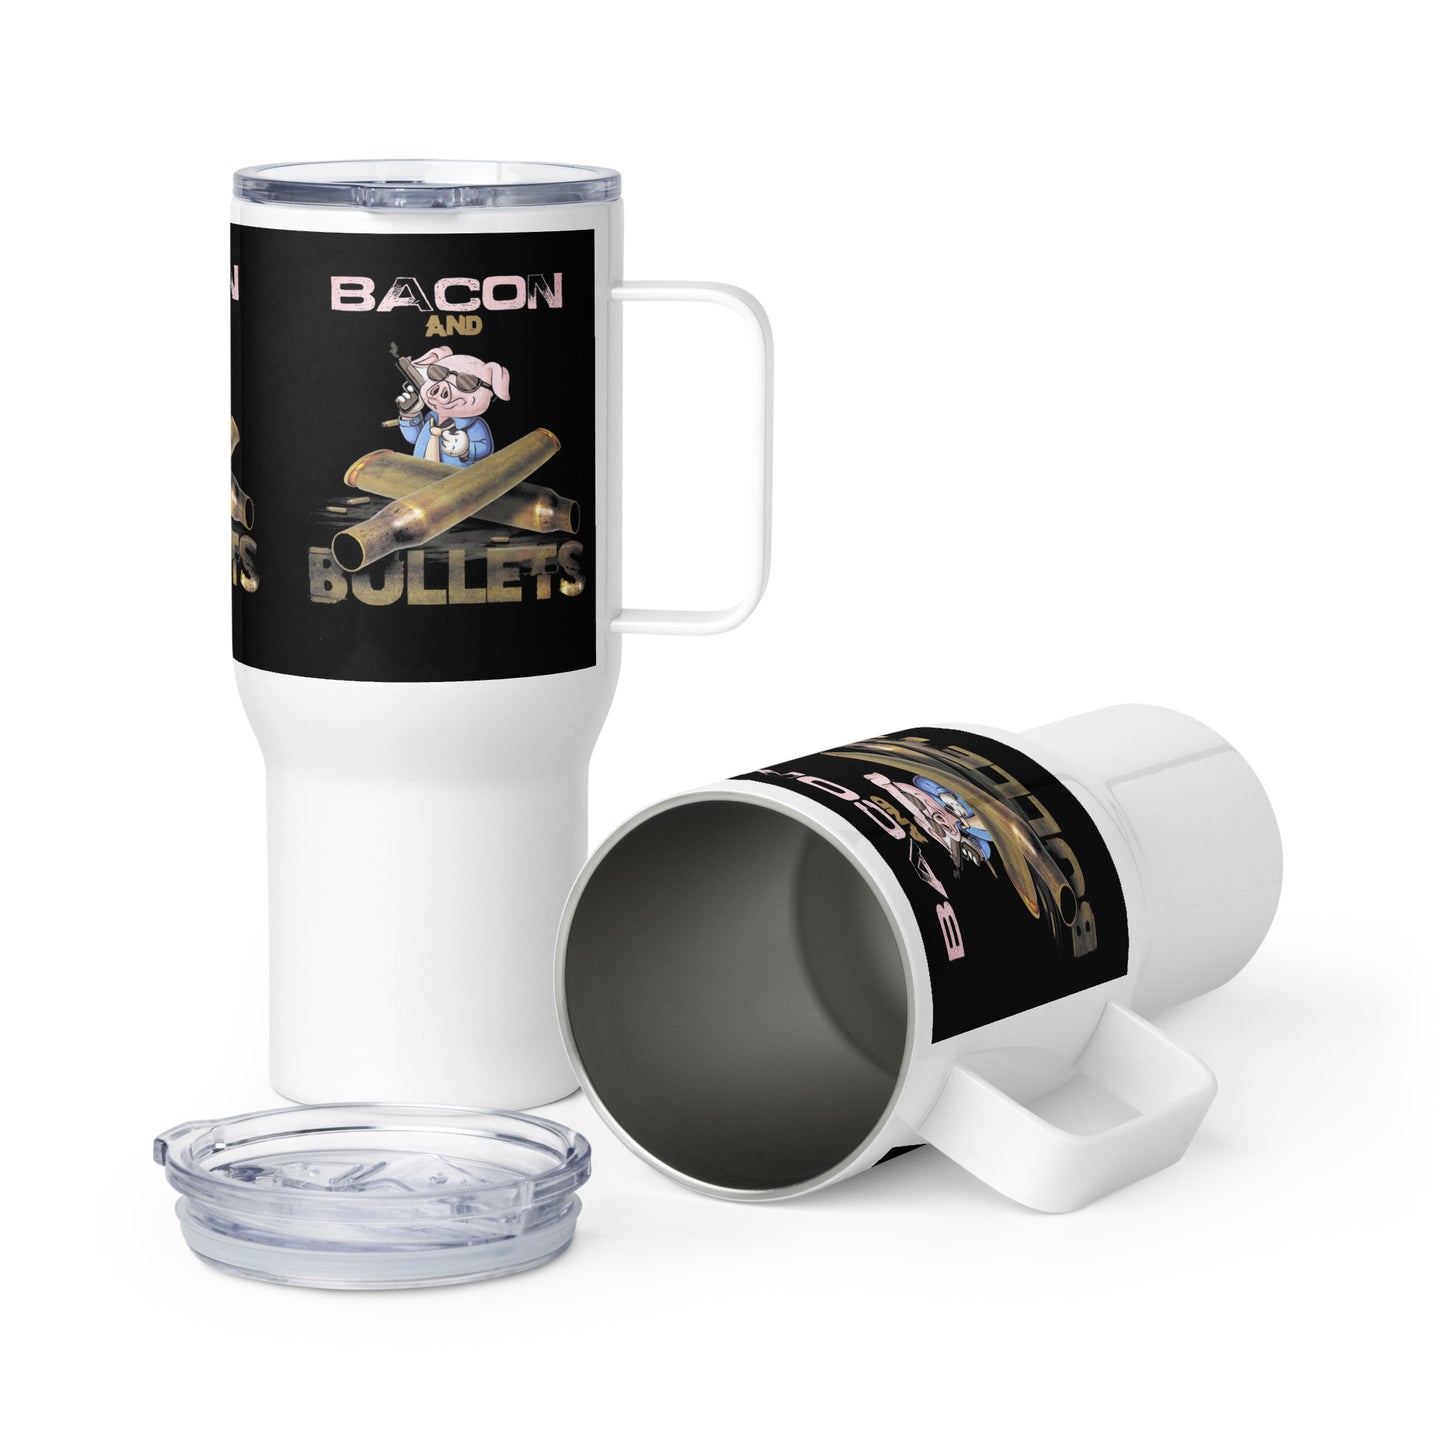 Bacon And Bullets Travel mug with a handle